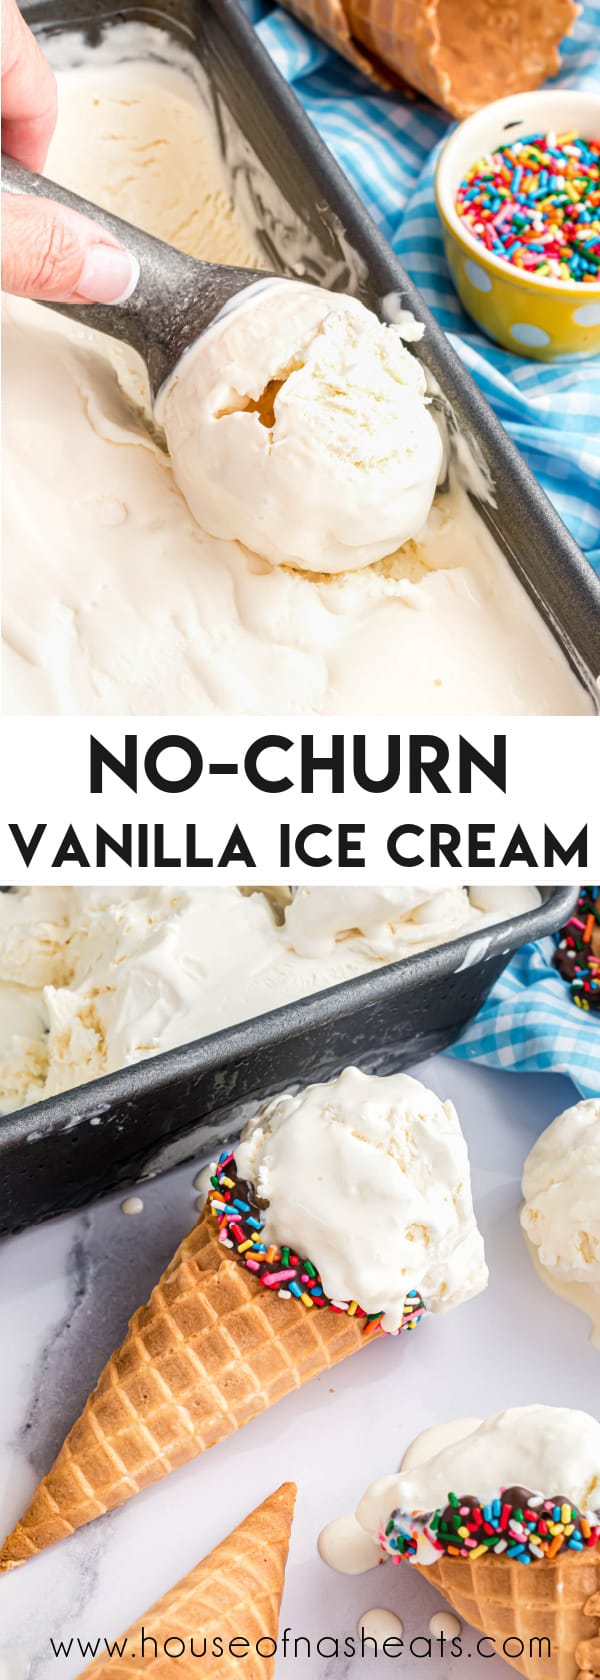 A collage of images of no churn vanilla ice cream with text overlay.